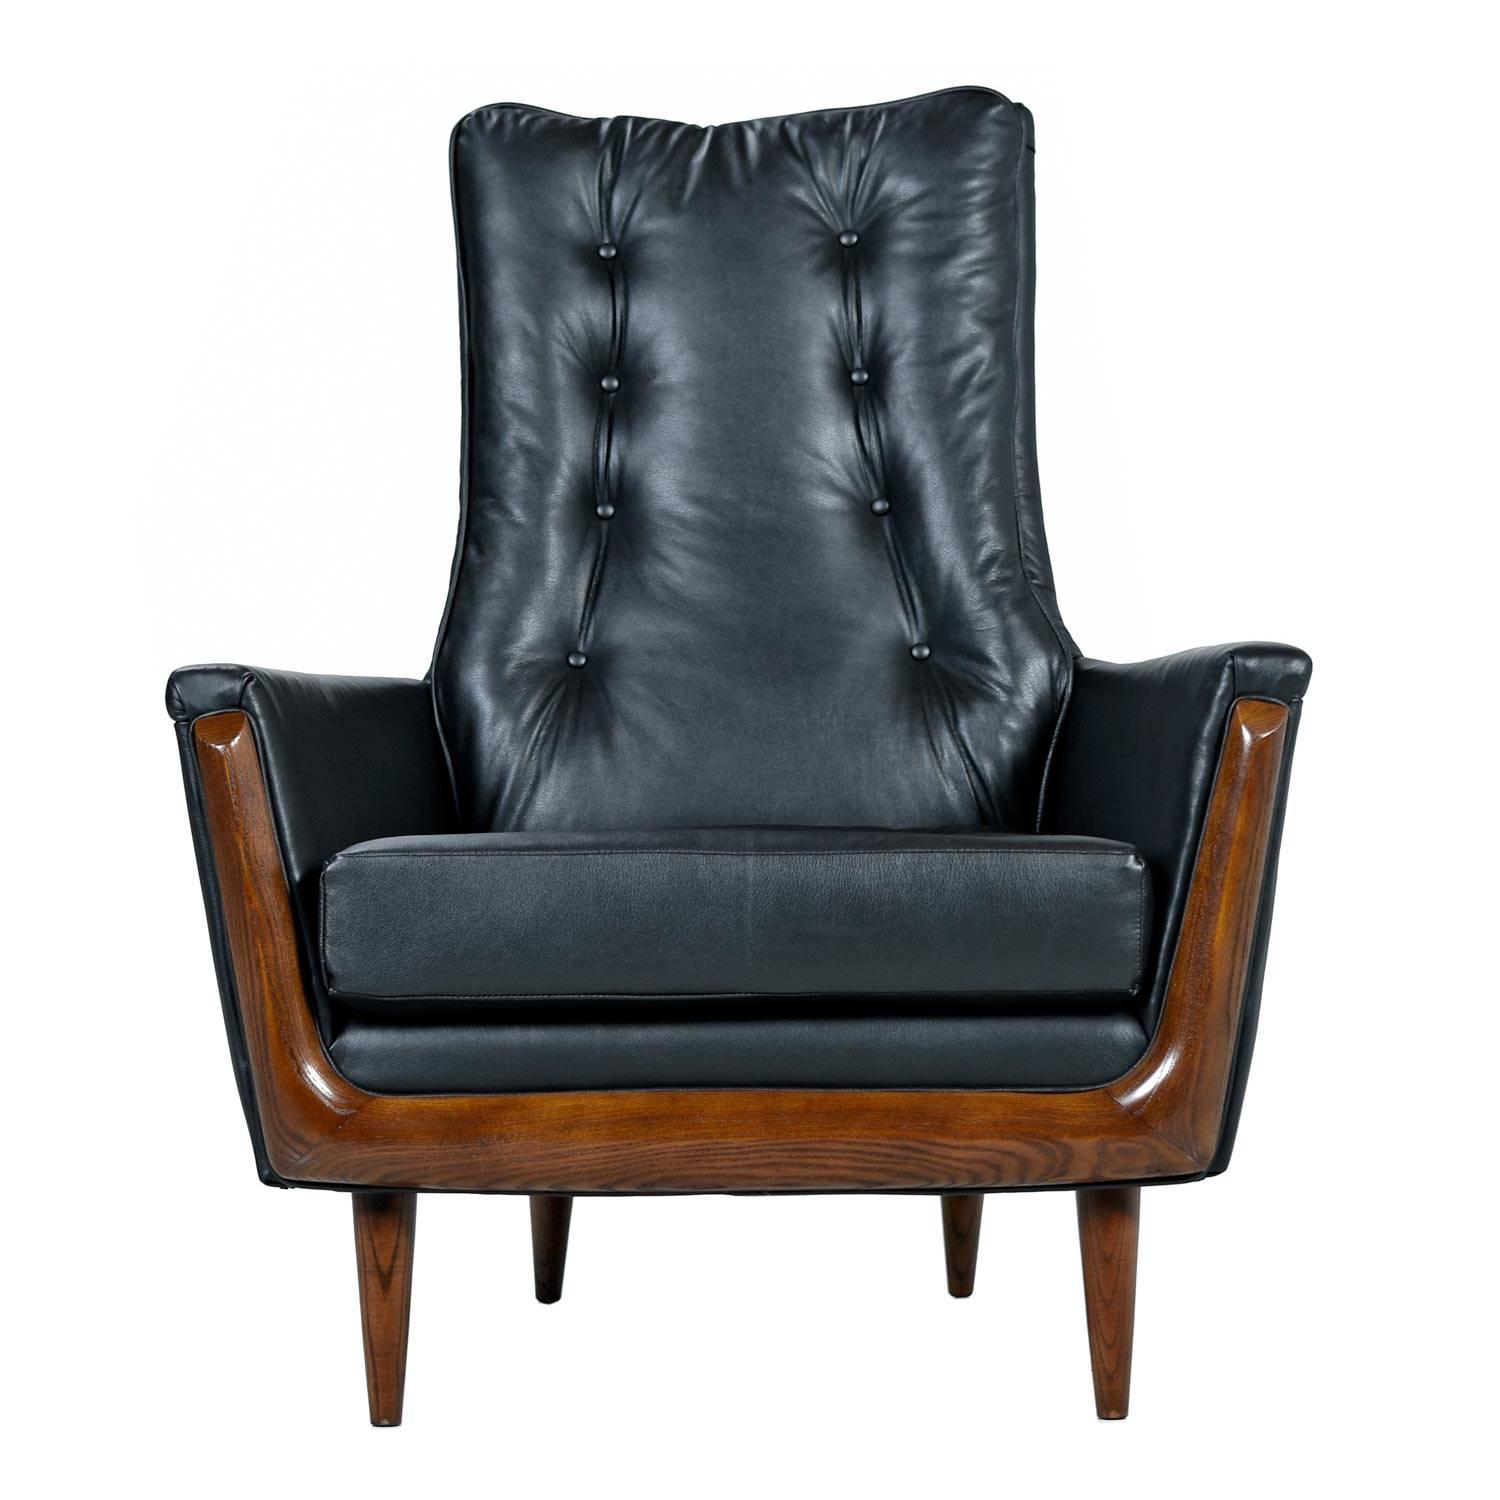 Restored Adrian Pearsall Style Black Leather High Back Tufted Lounge Chair